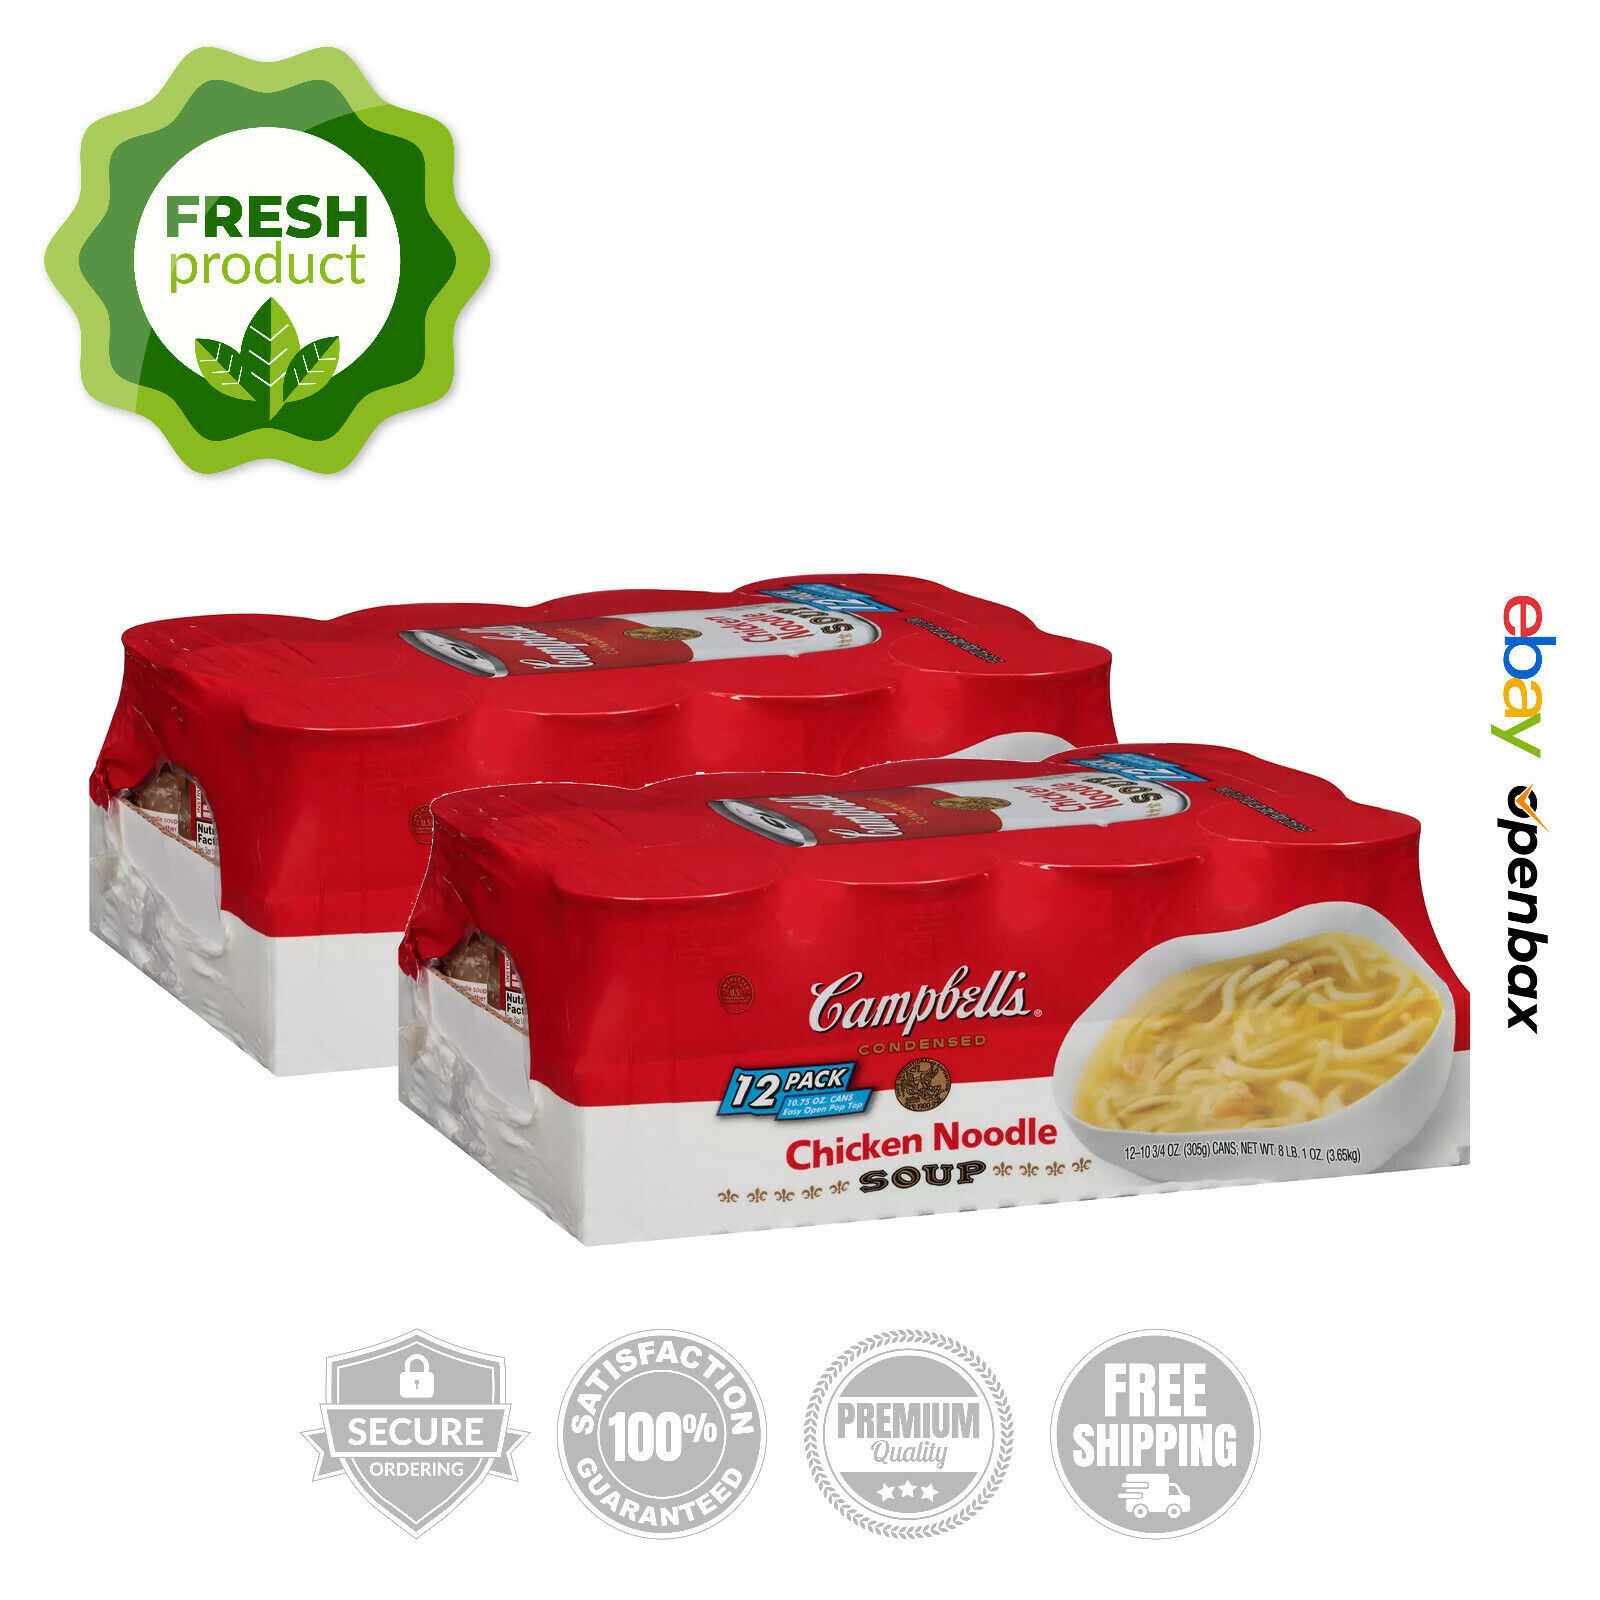 Primary image for Campbell's Condensed Chicken Noodle Soup (10.75 oz., 12 ct.) (2pk)